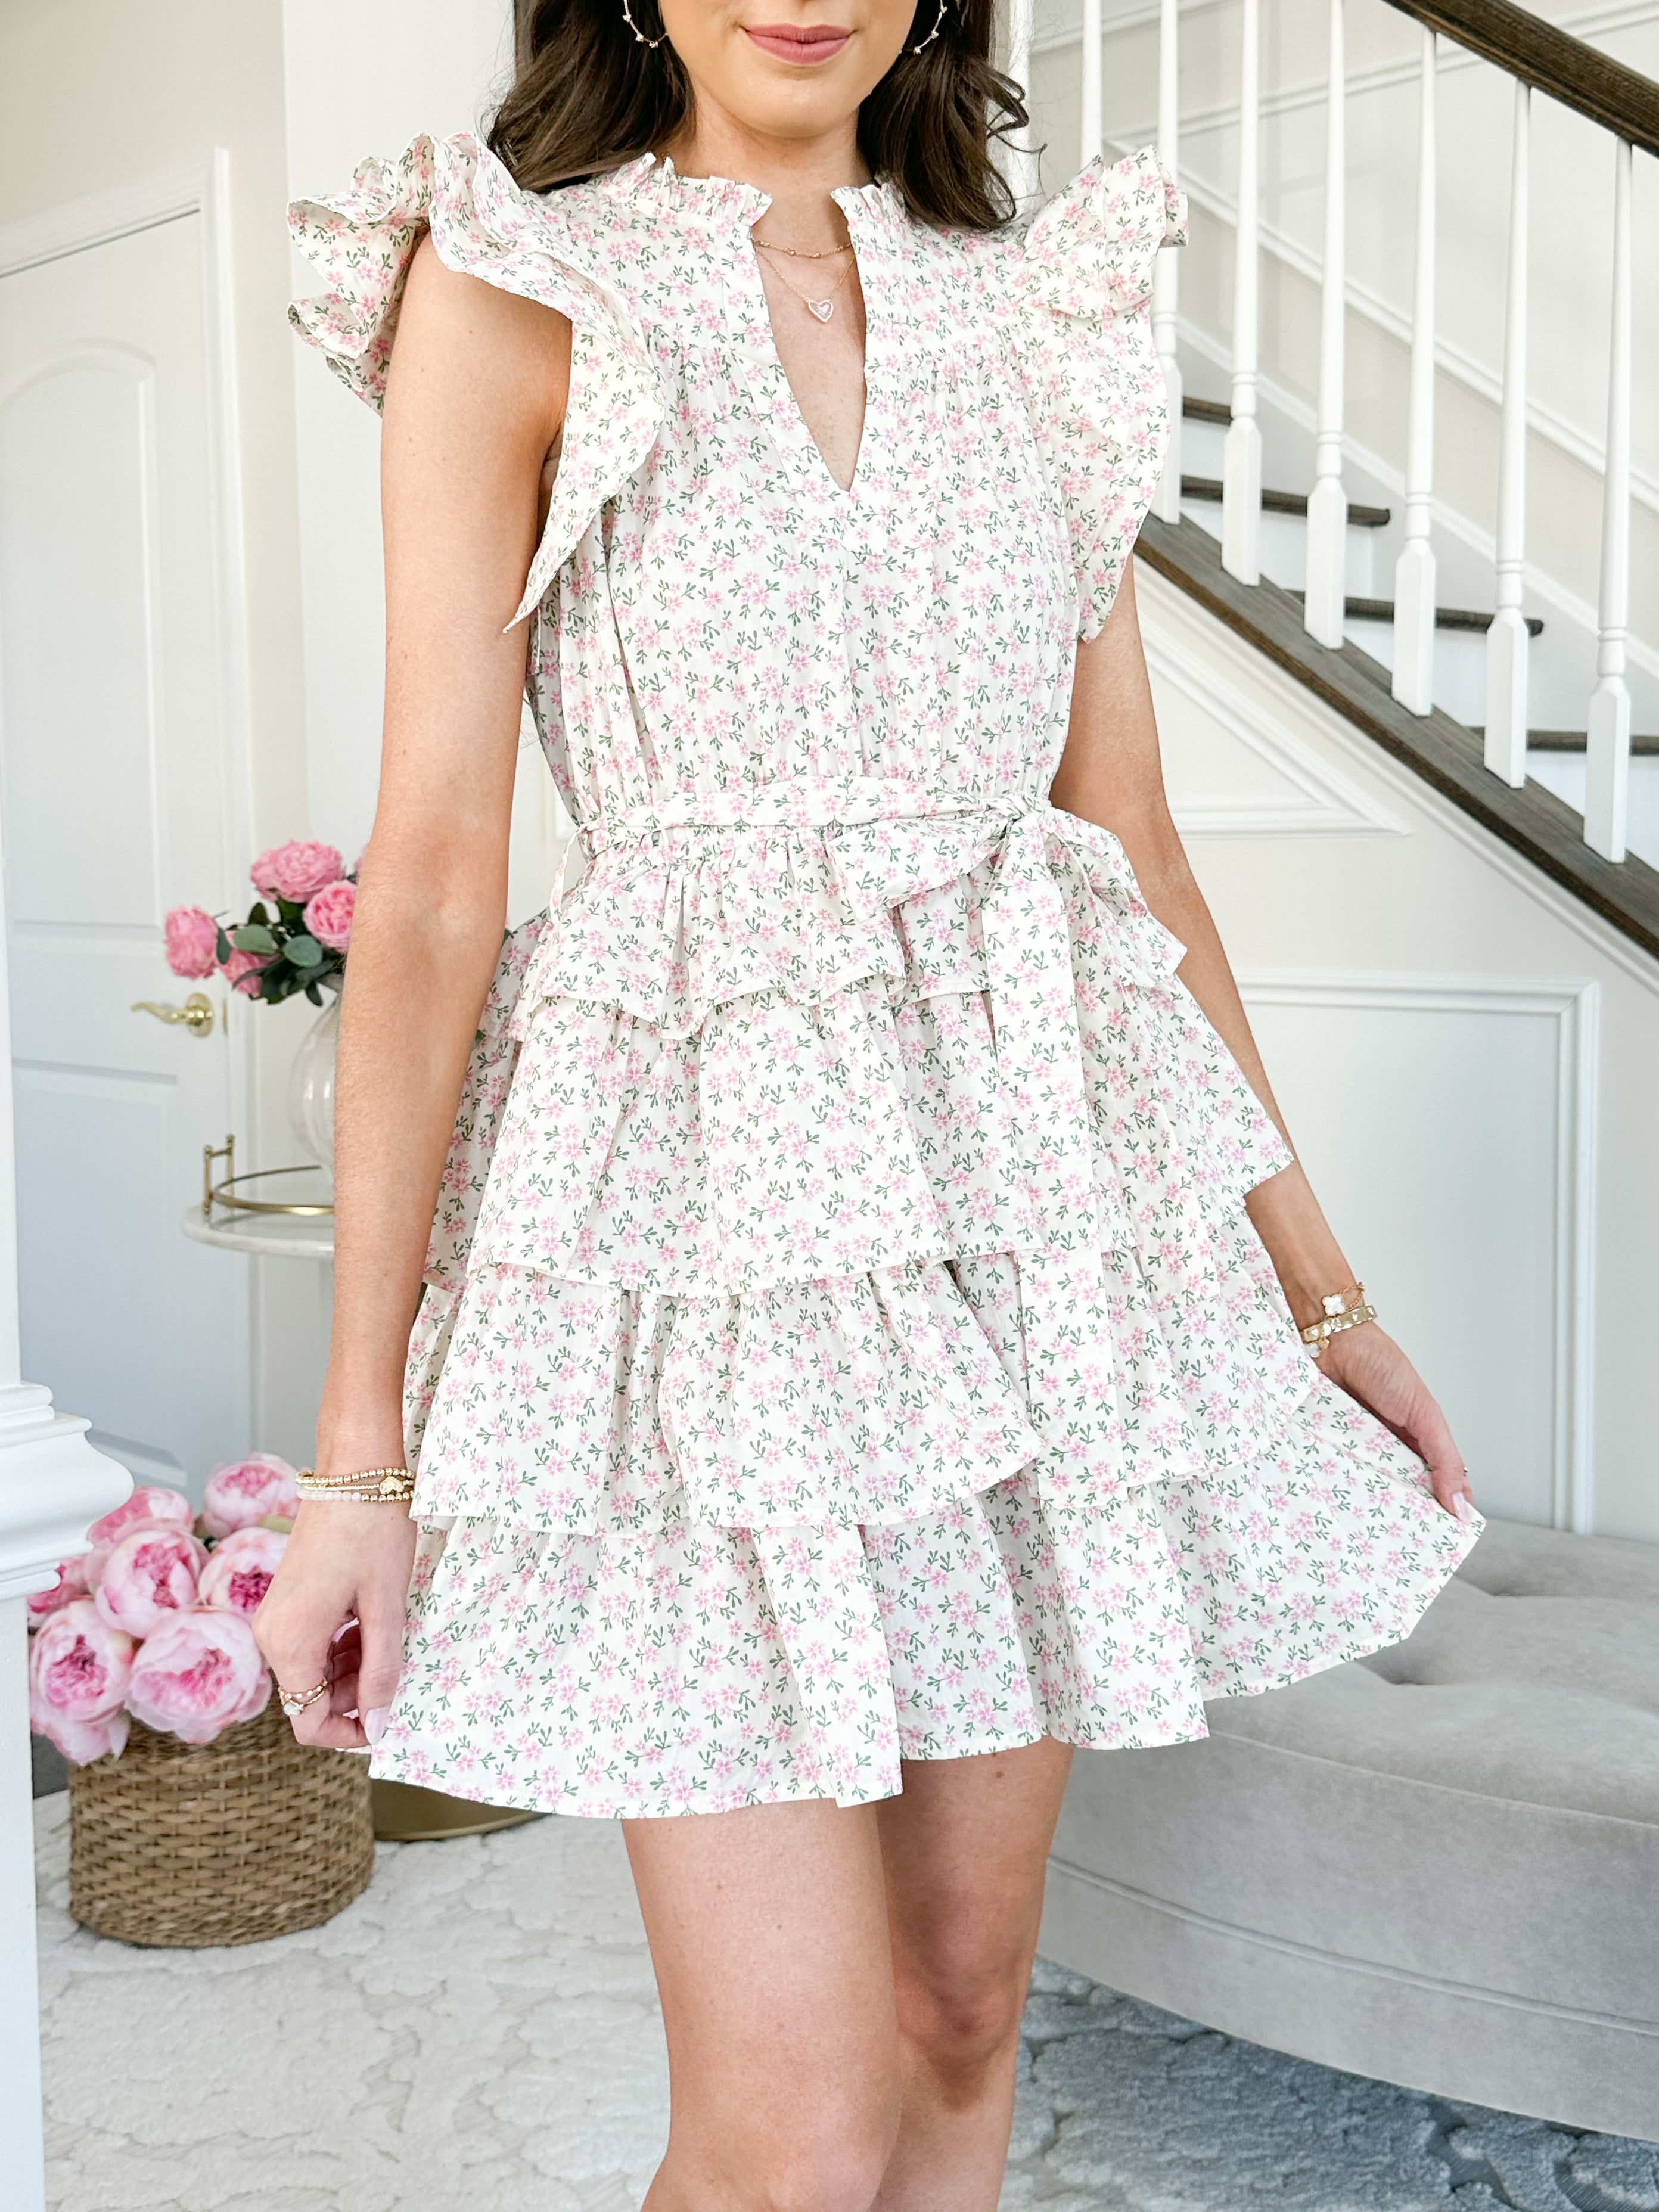 Tea for Two Floral Ruffle Dress - FINAL SALE